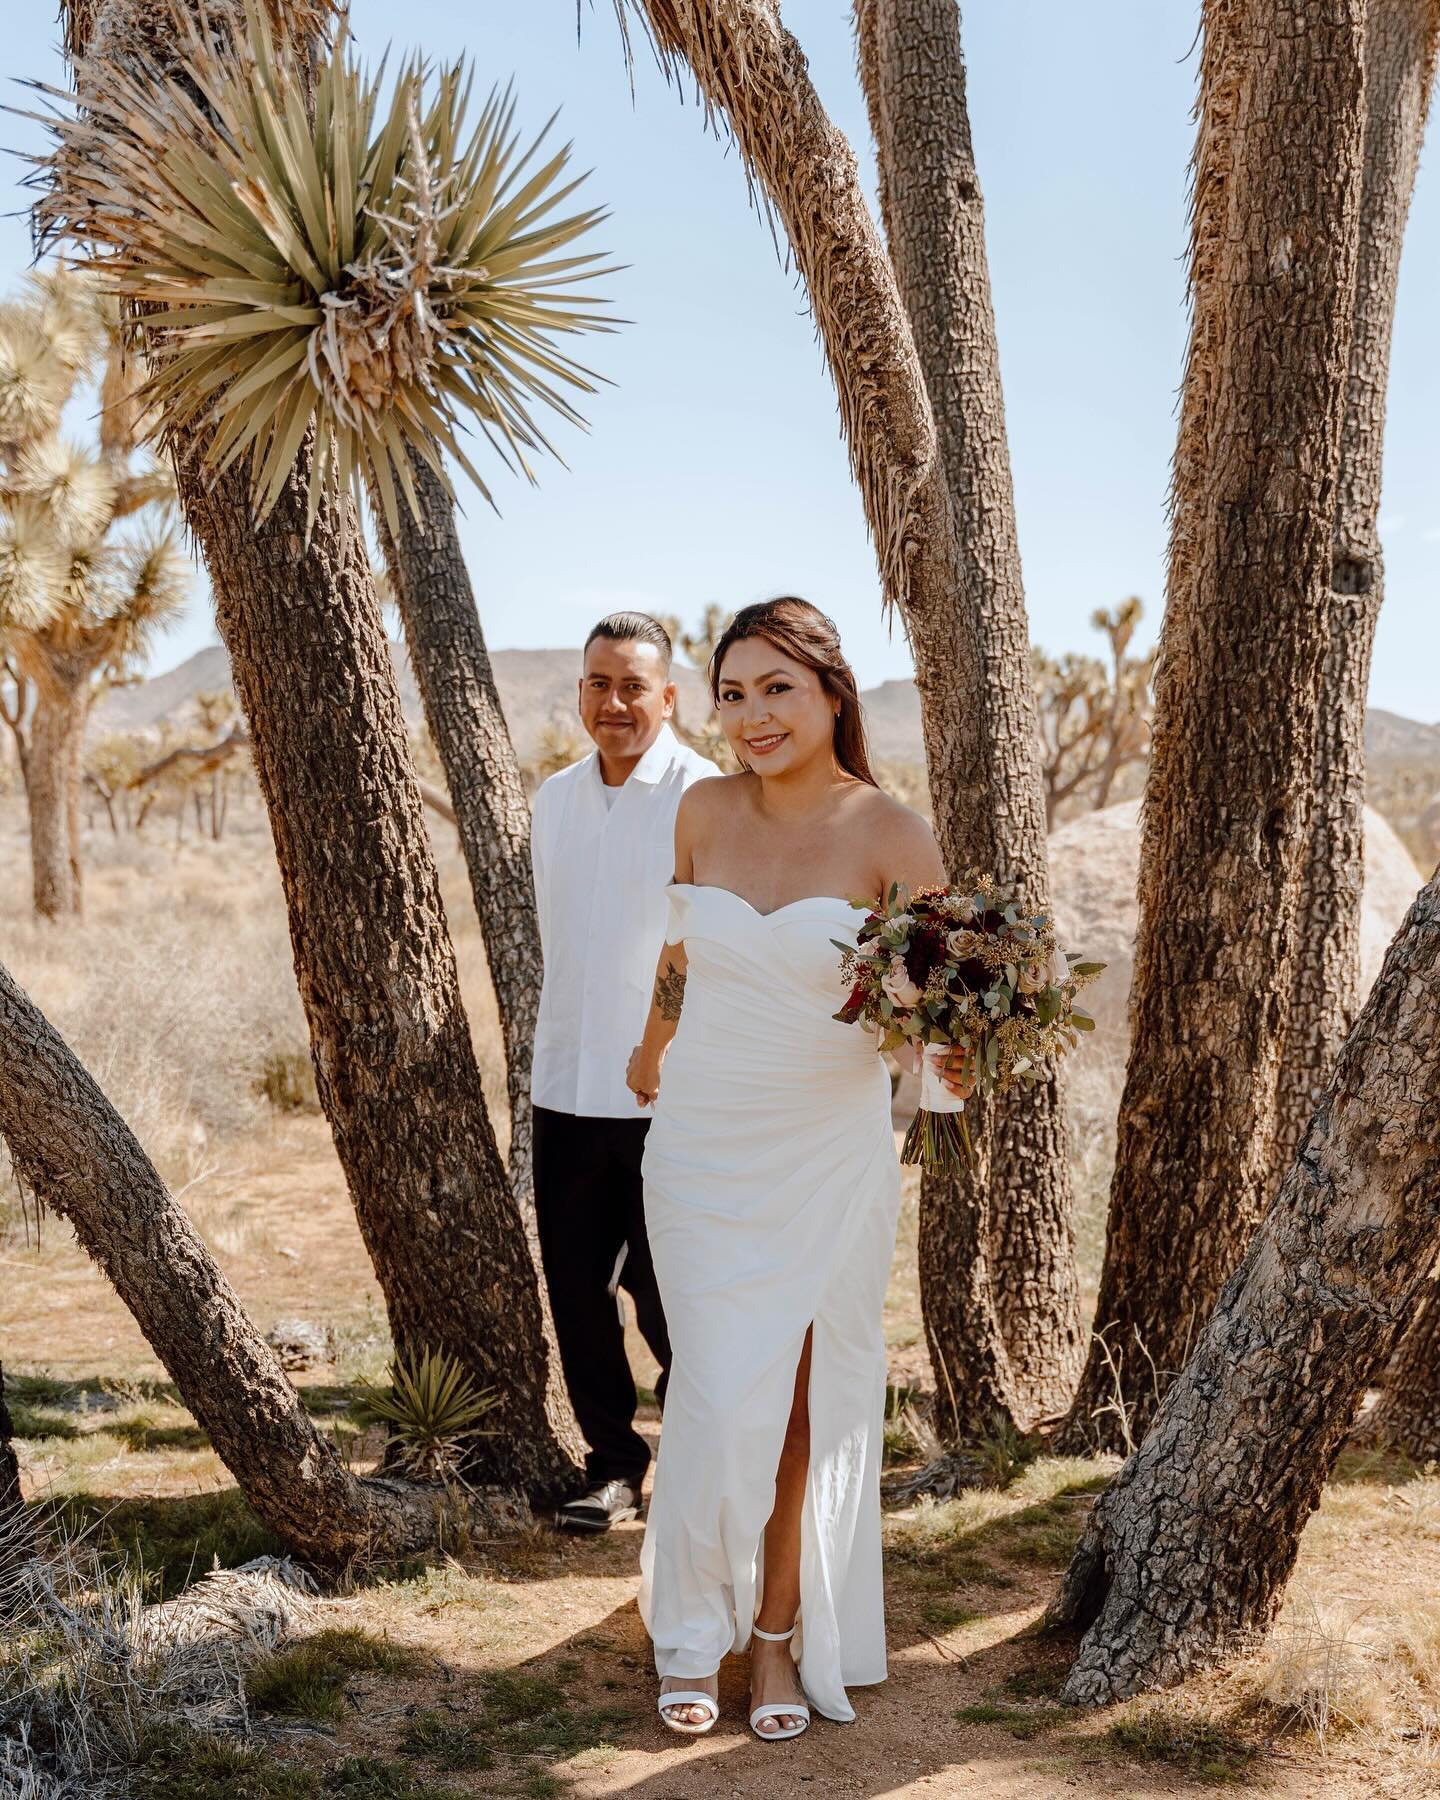 Monica &amp; Erving 🤍 Congratulations to the Alfaro&rsquo;s!🤍💍🌵 If you&rsquo;ve been thinking about eloping, this is your sign to do it! Joshua tree was the perfect place for it, it&rsquo;s intimate and soo beautiful!✨ 

#elopement #elopmentphoto